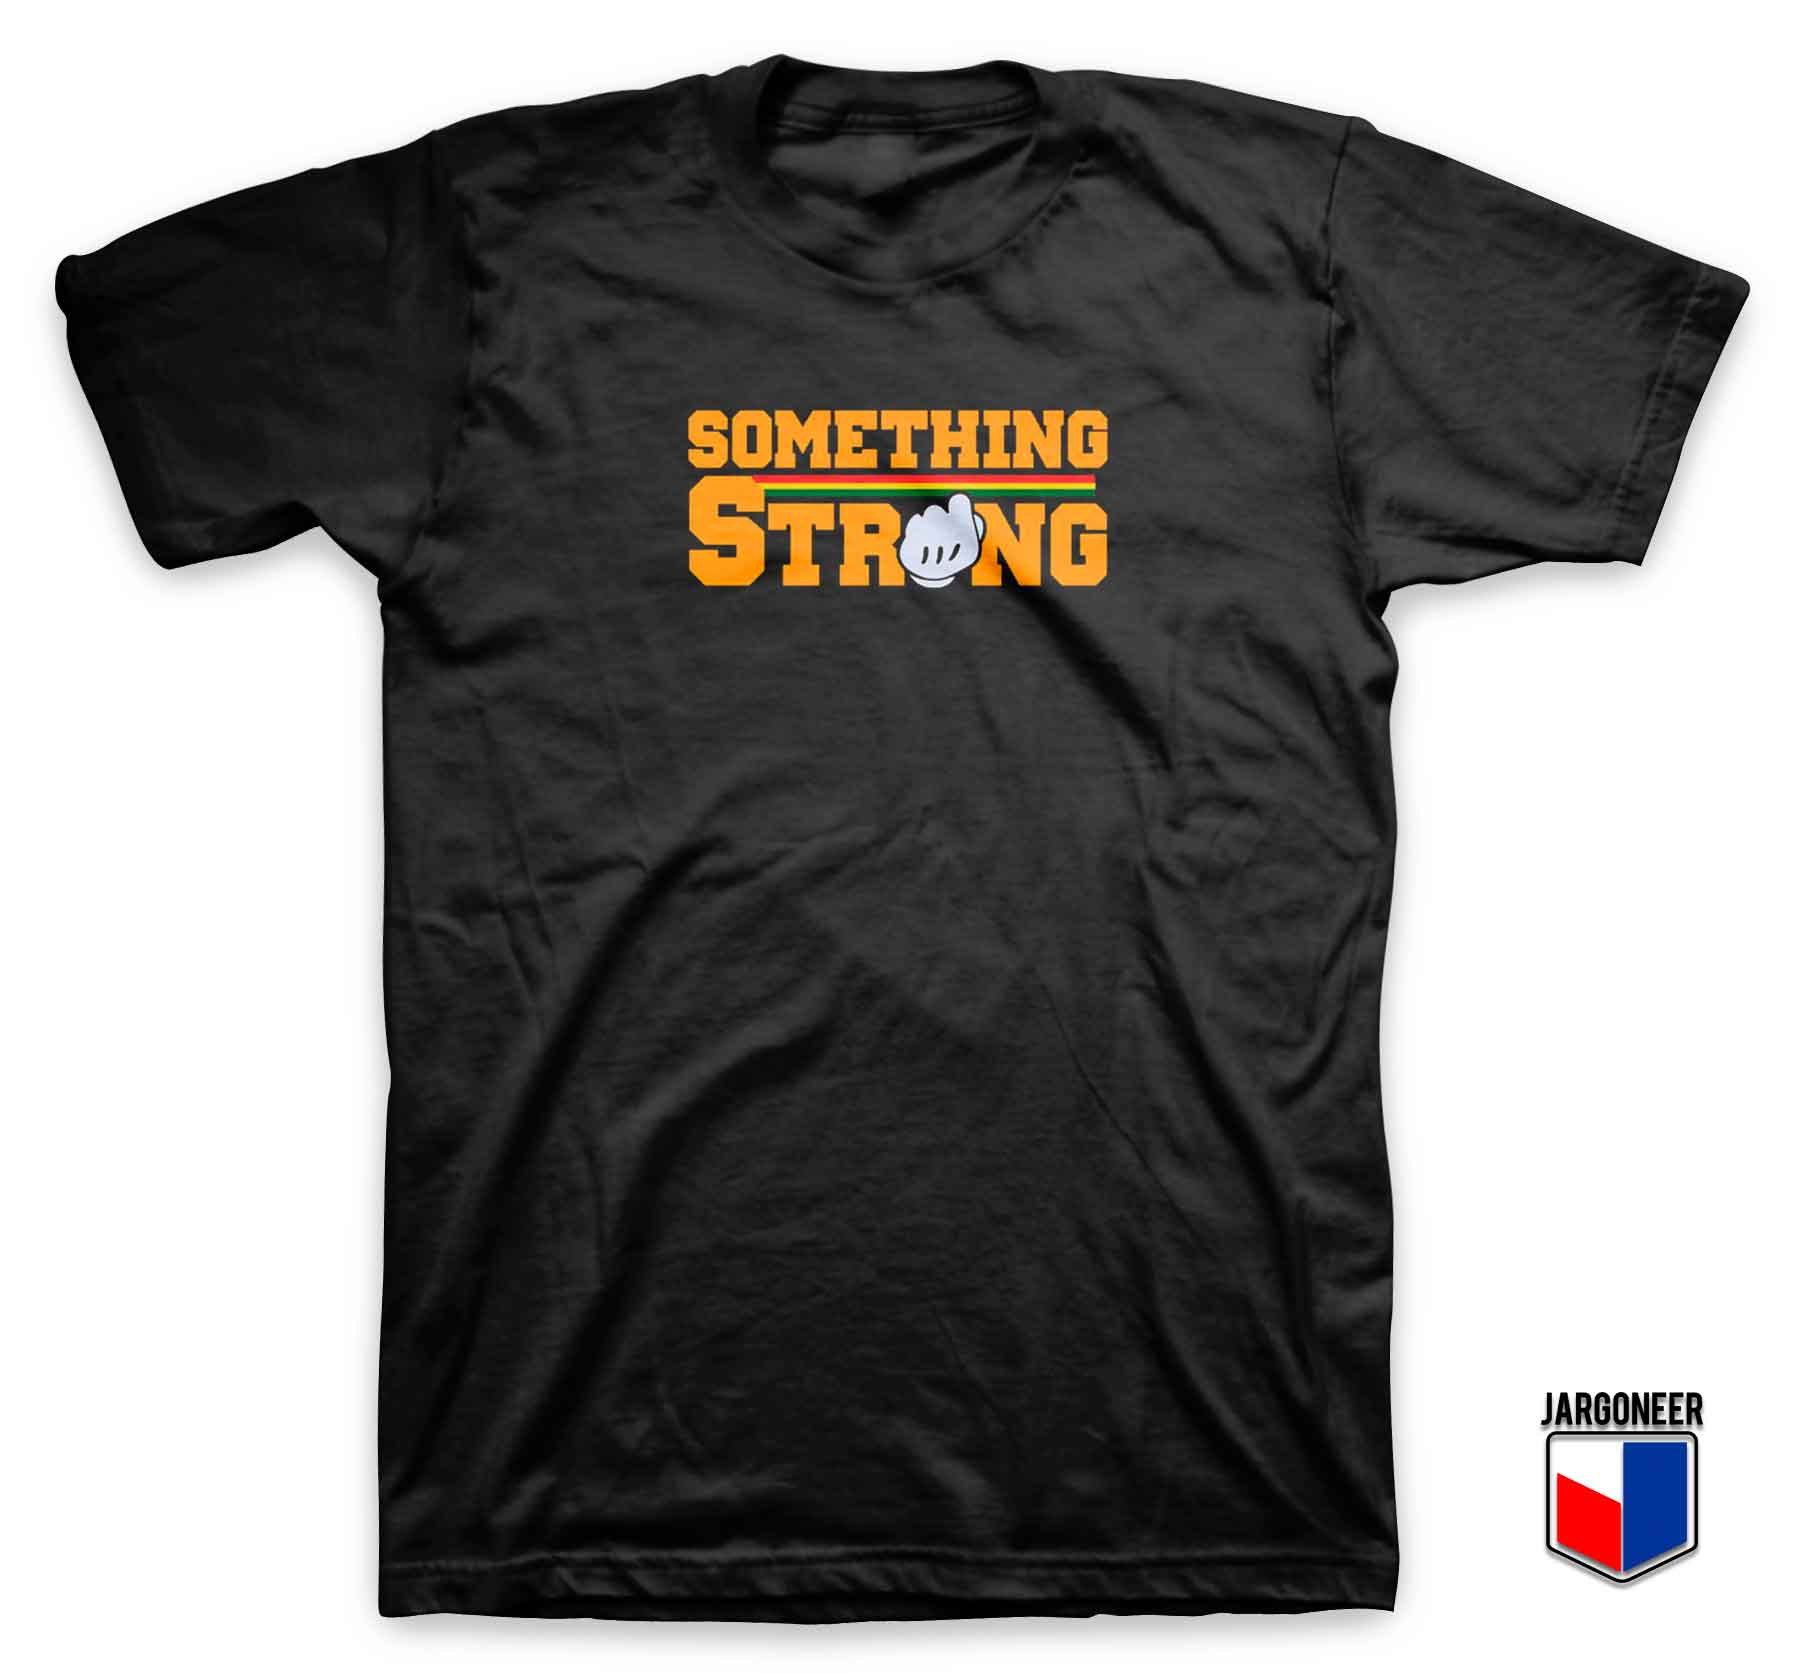 Something Strong - Shop Unique Graphic Cool Shirt Designs